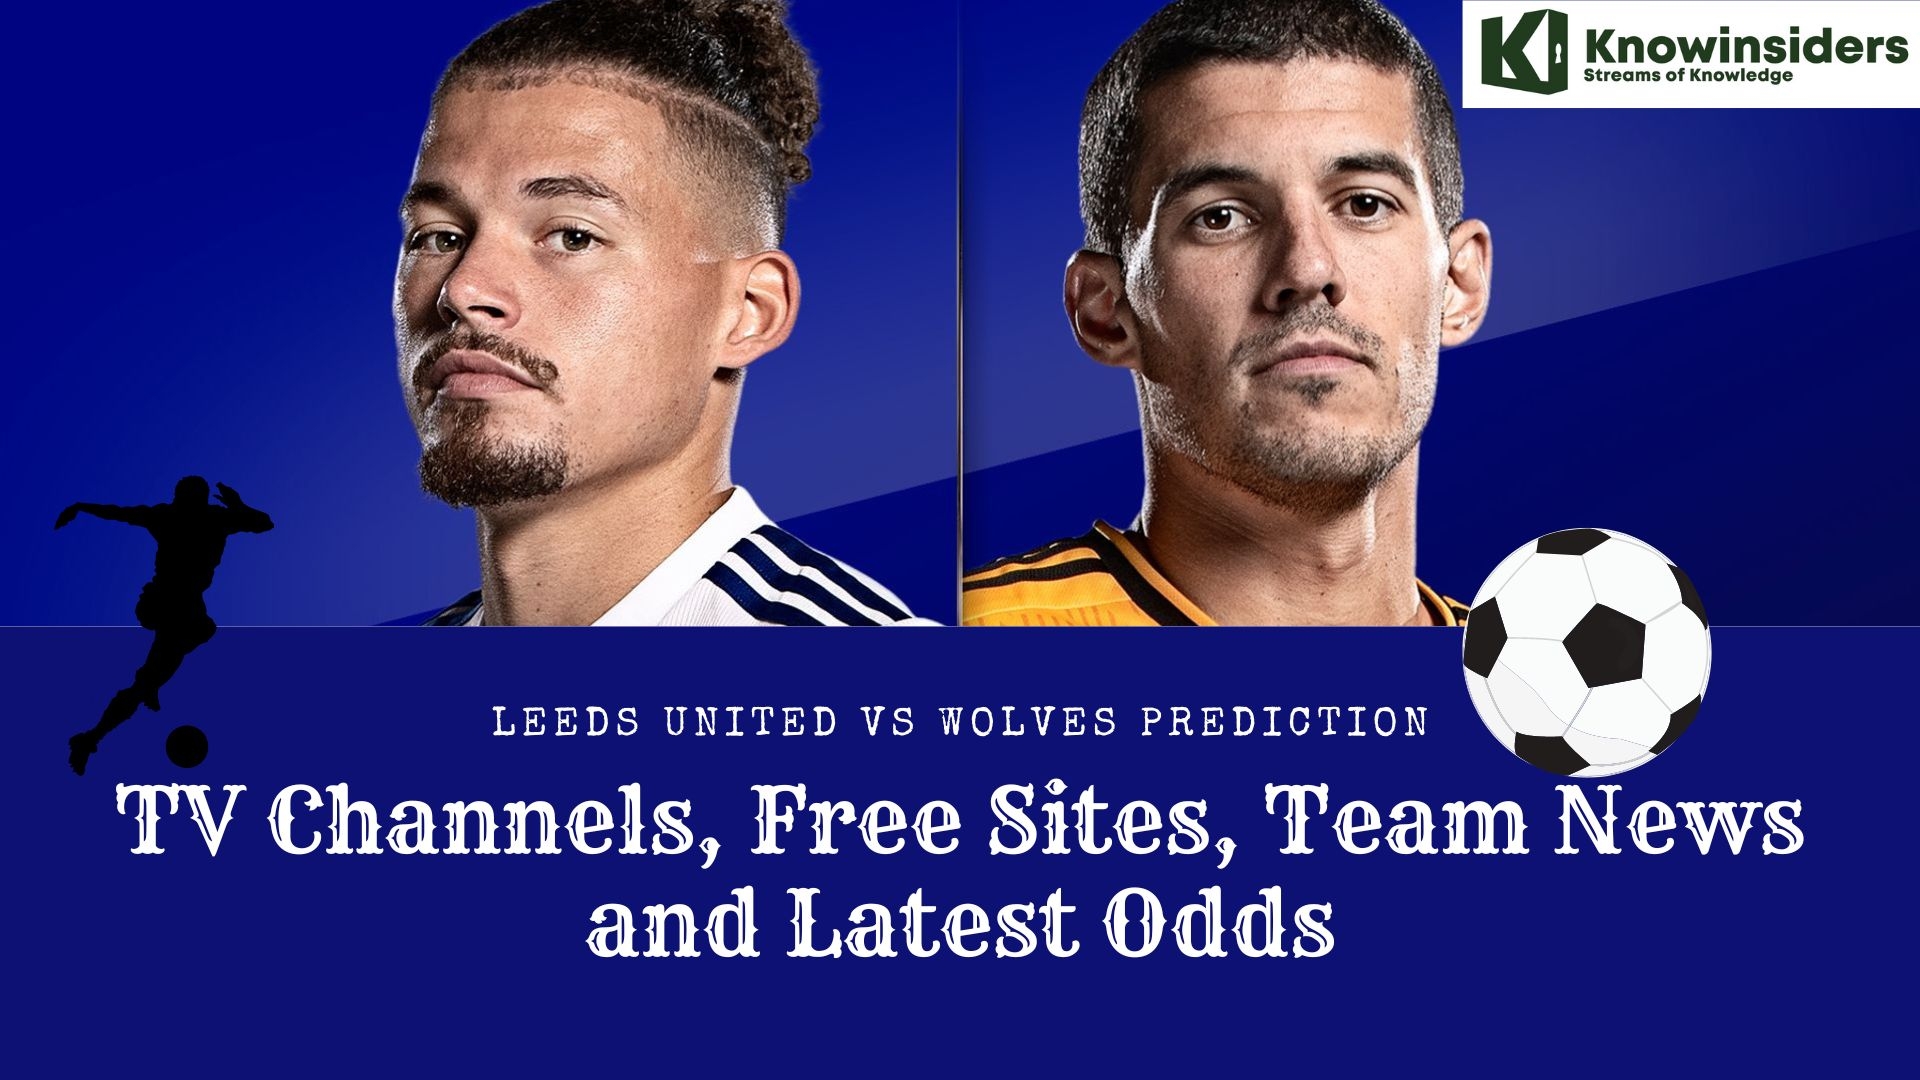 Leeds United vs Wolves Prediction: TV Channels, Free Sites to Watch, Team News and Odds